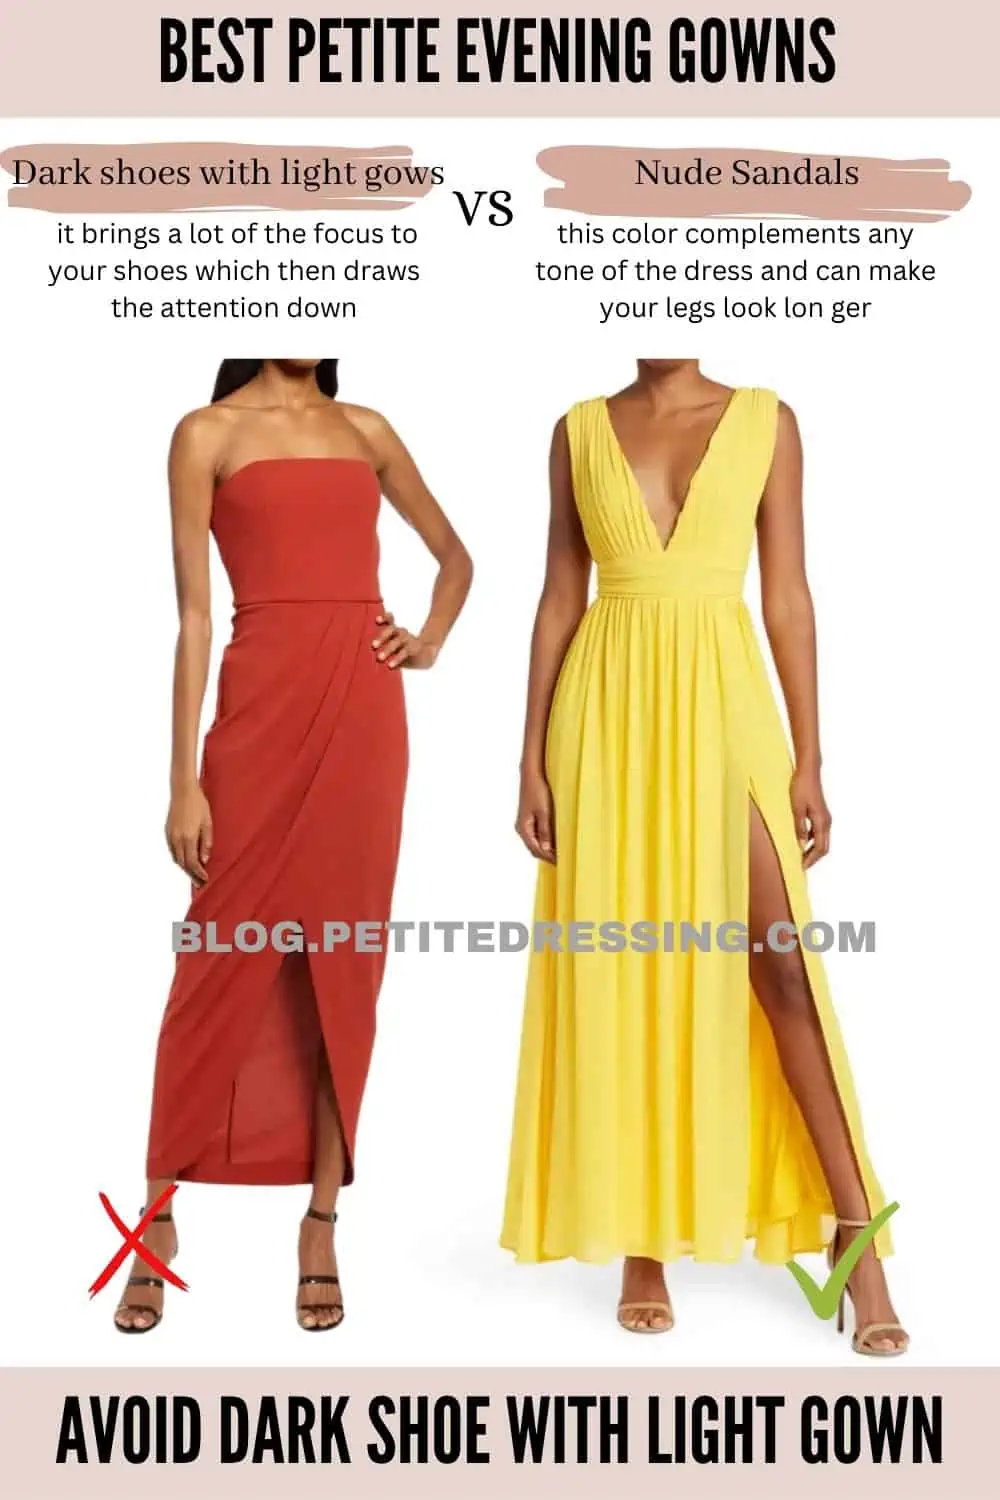 Evening Gown – The One & Only Shoes, Clothing and Accessories